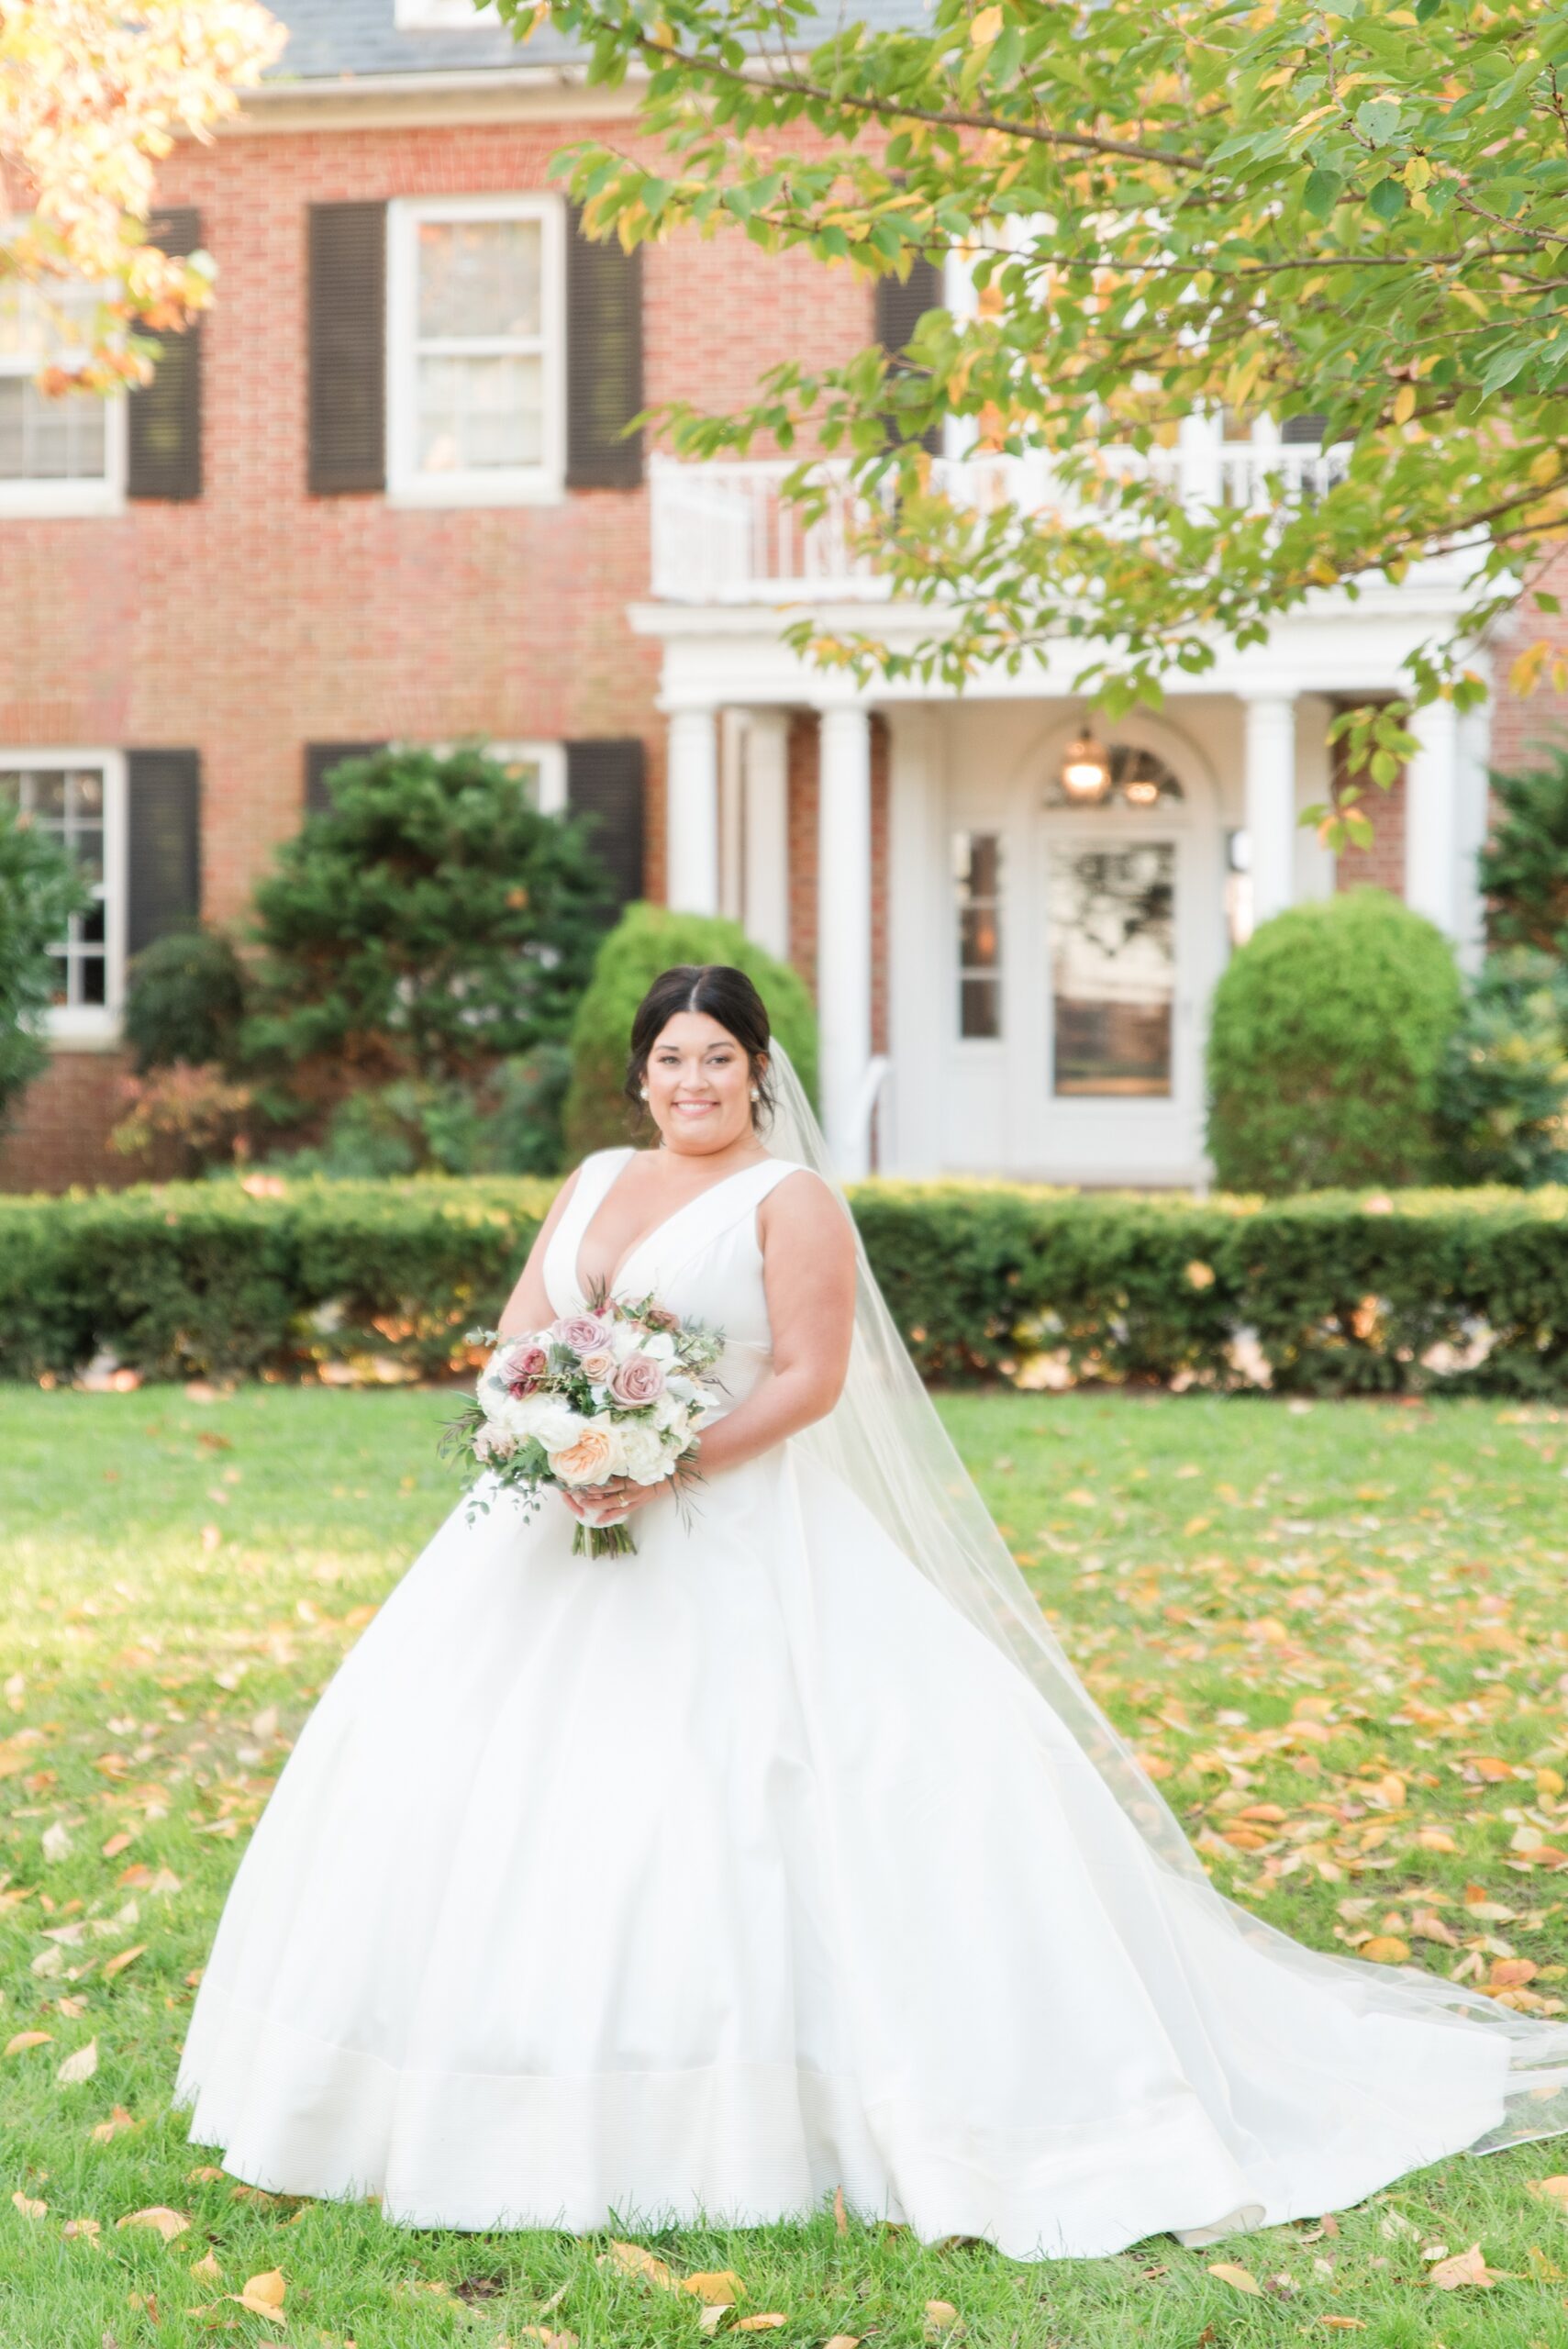 A bride smiles while standing in a lawn in front of the Brittland Estates Wedding venue